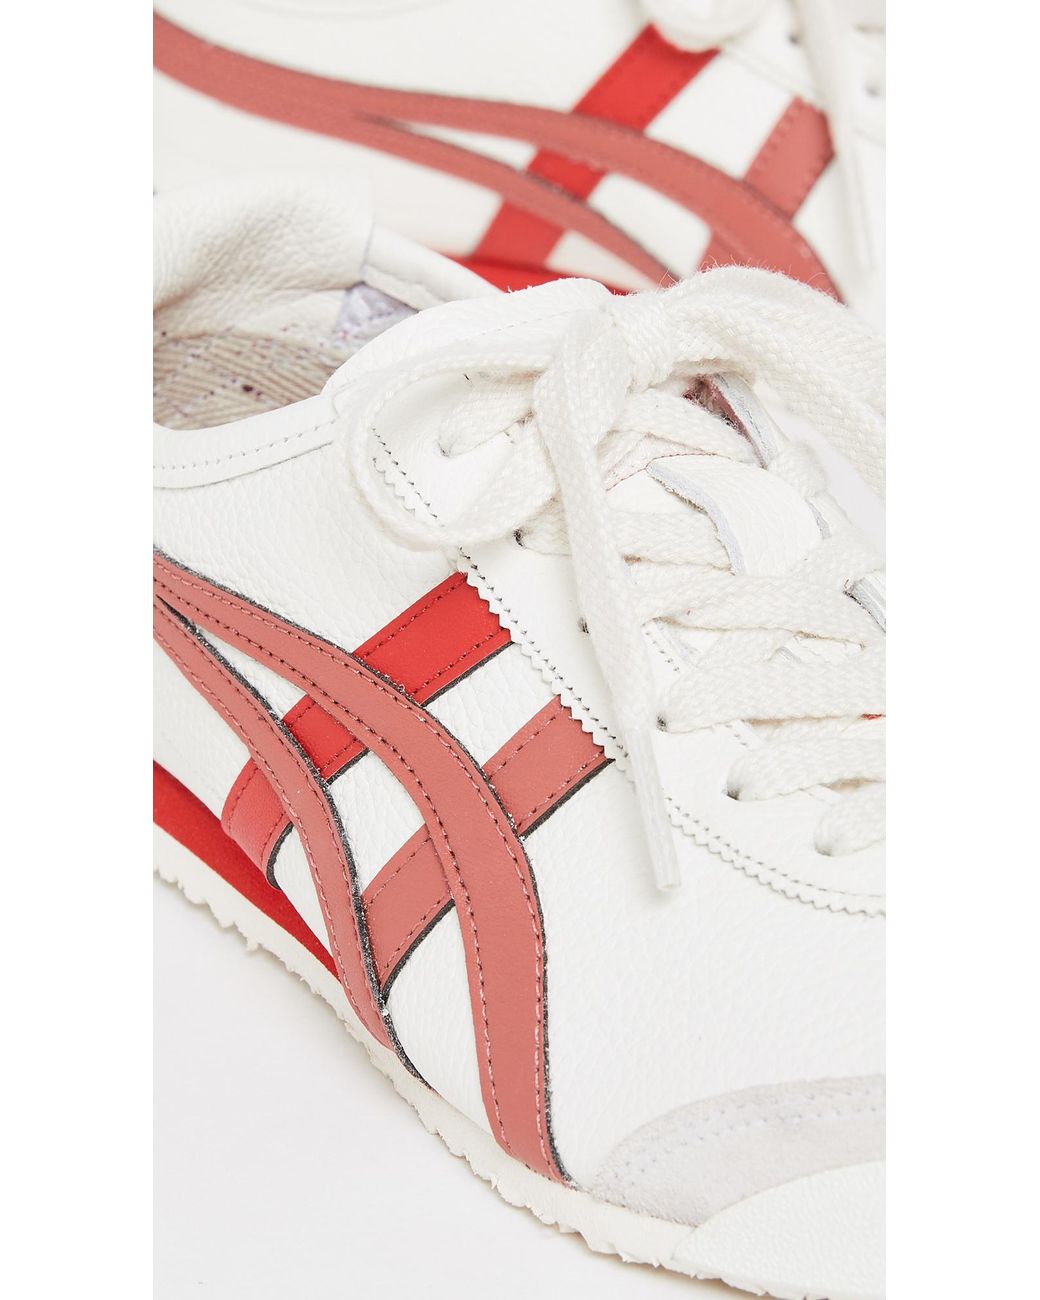 Onitsuka Tiger Mexico 66 Sneakers in Red | Lyst